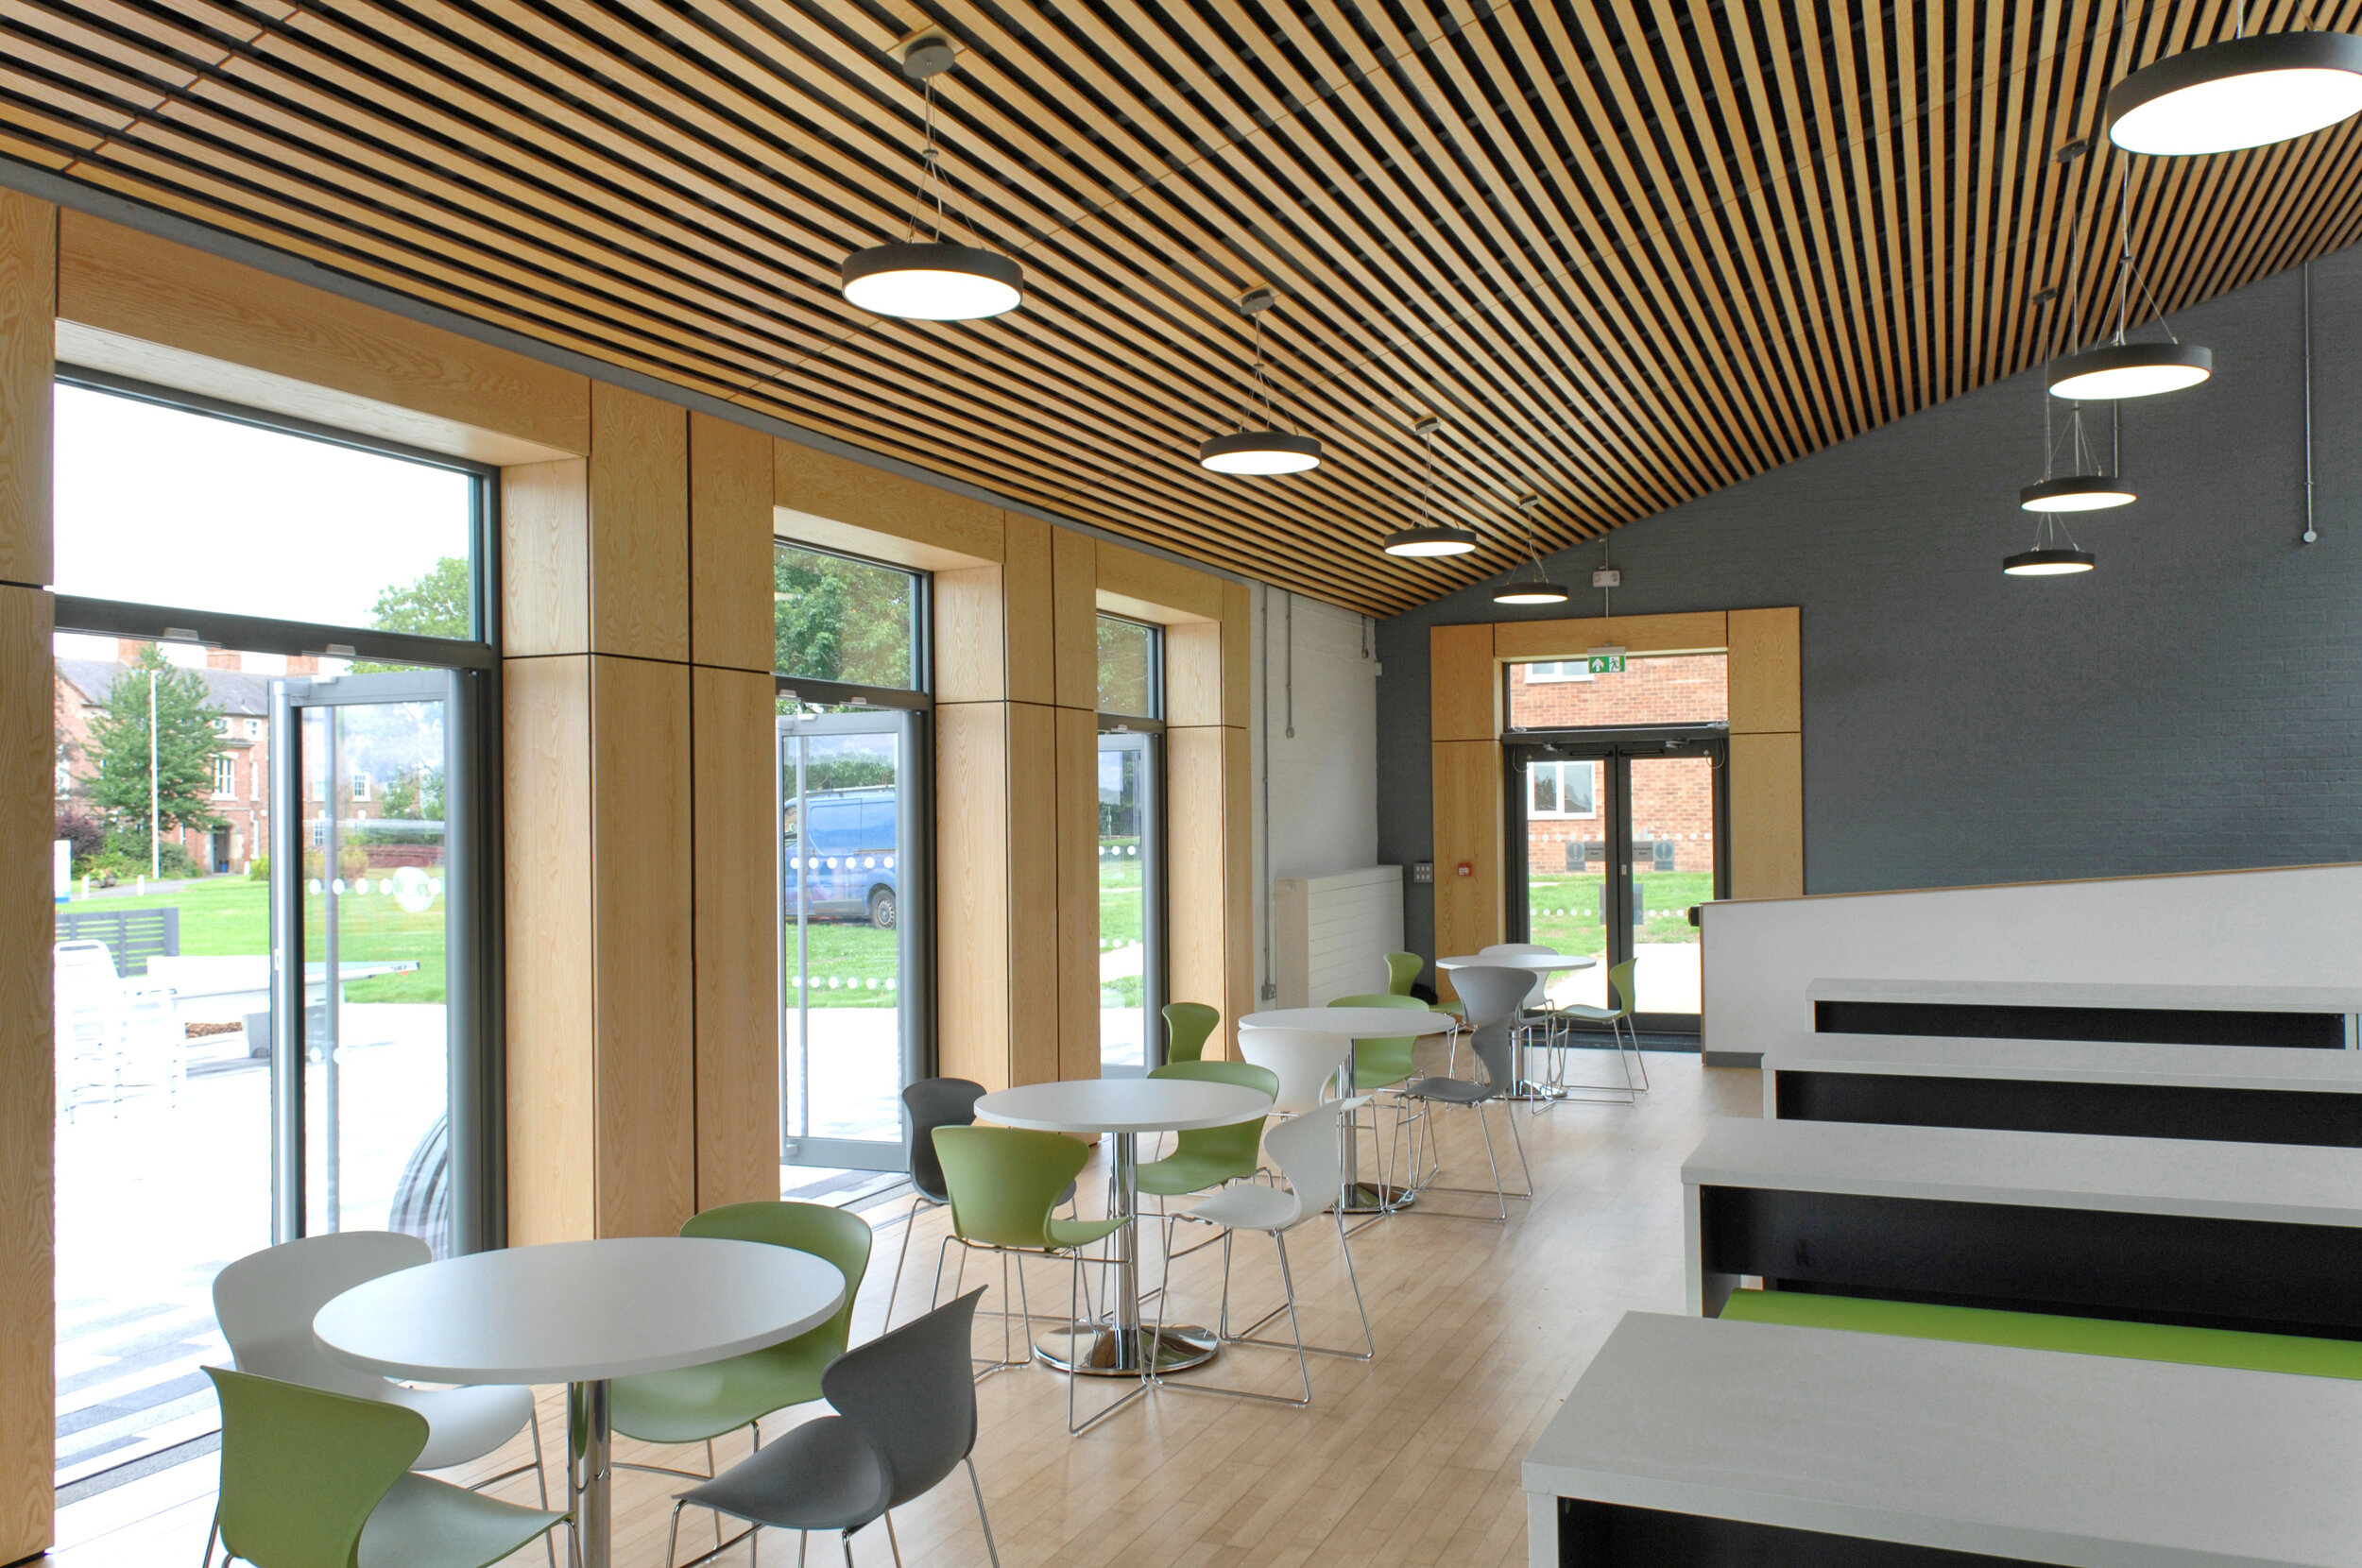 North Shropshire College - Refectory at the Walford Campus